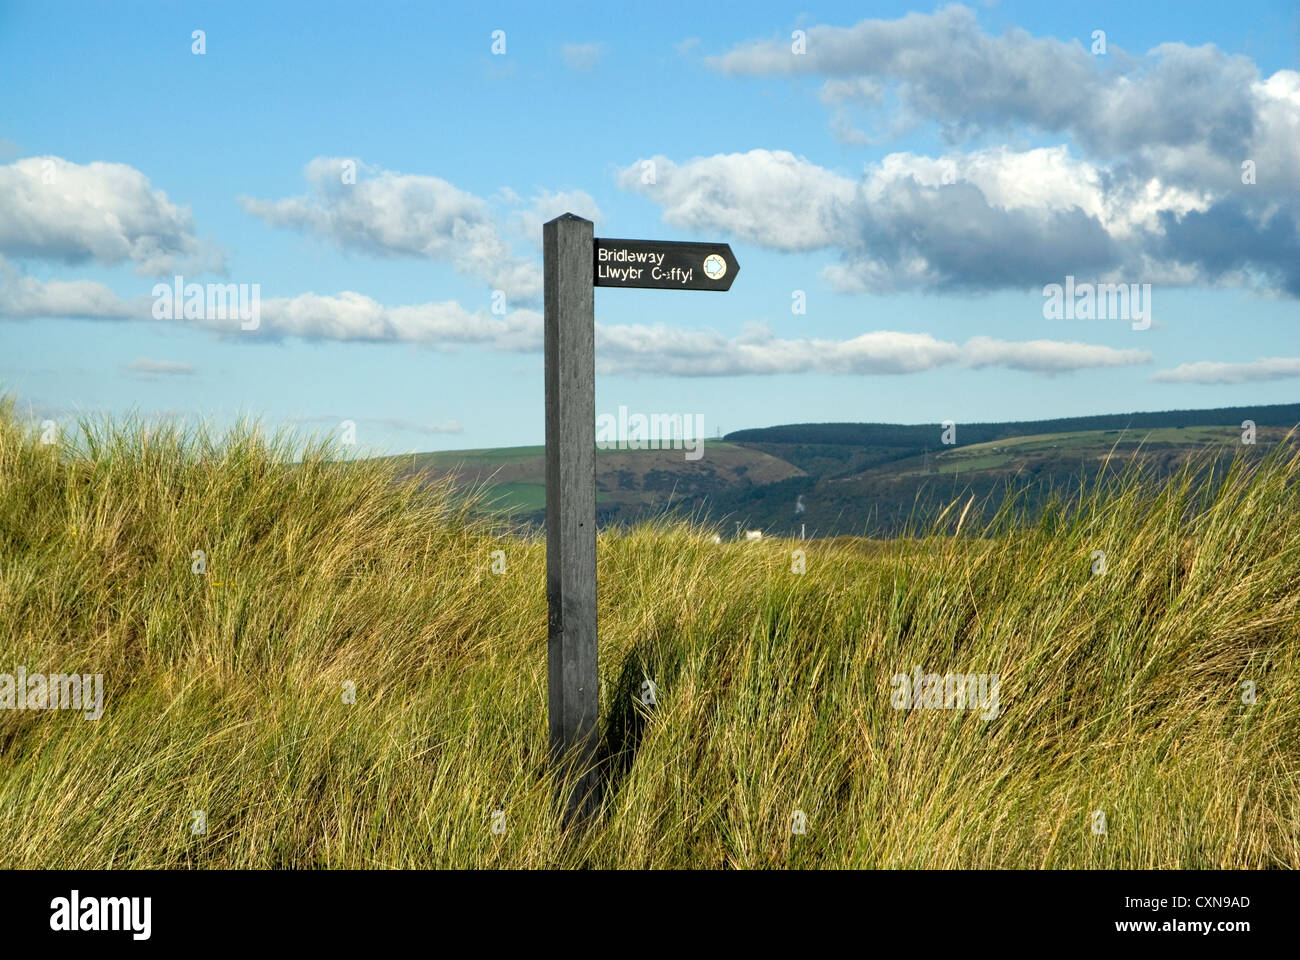 bridleway sign in english and welsh kenfig national nature reserver near porthcawl wales uk Stock Photo